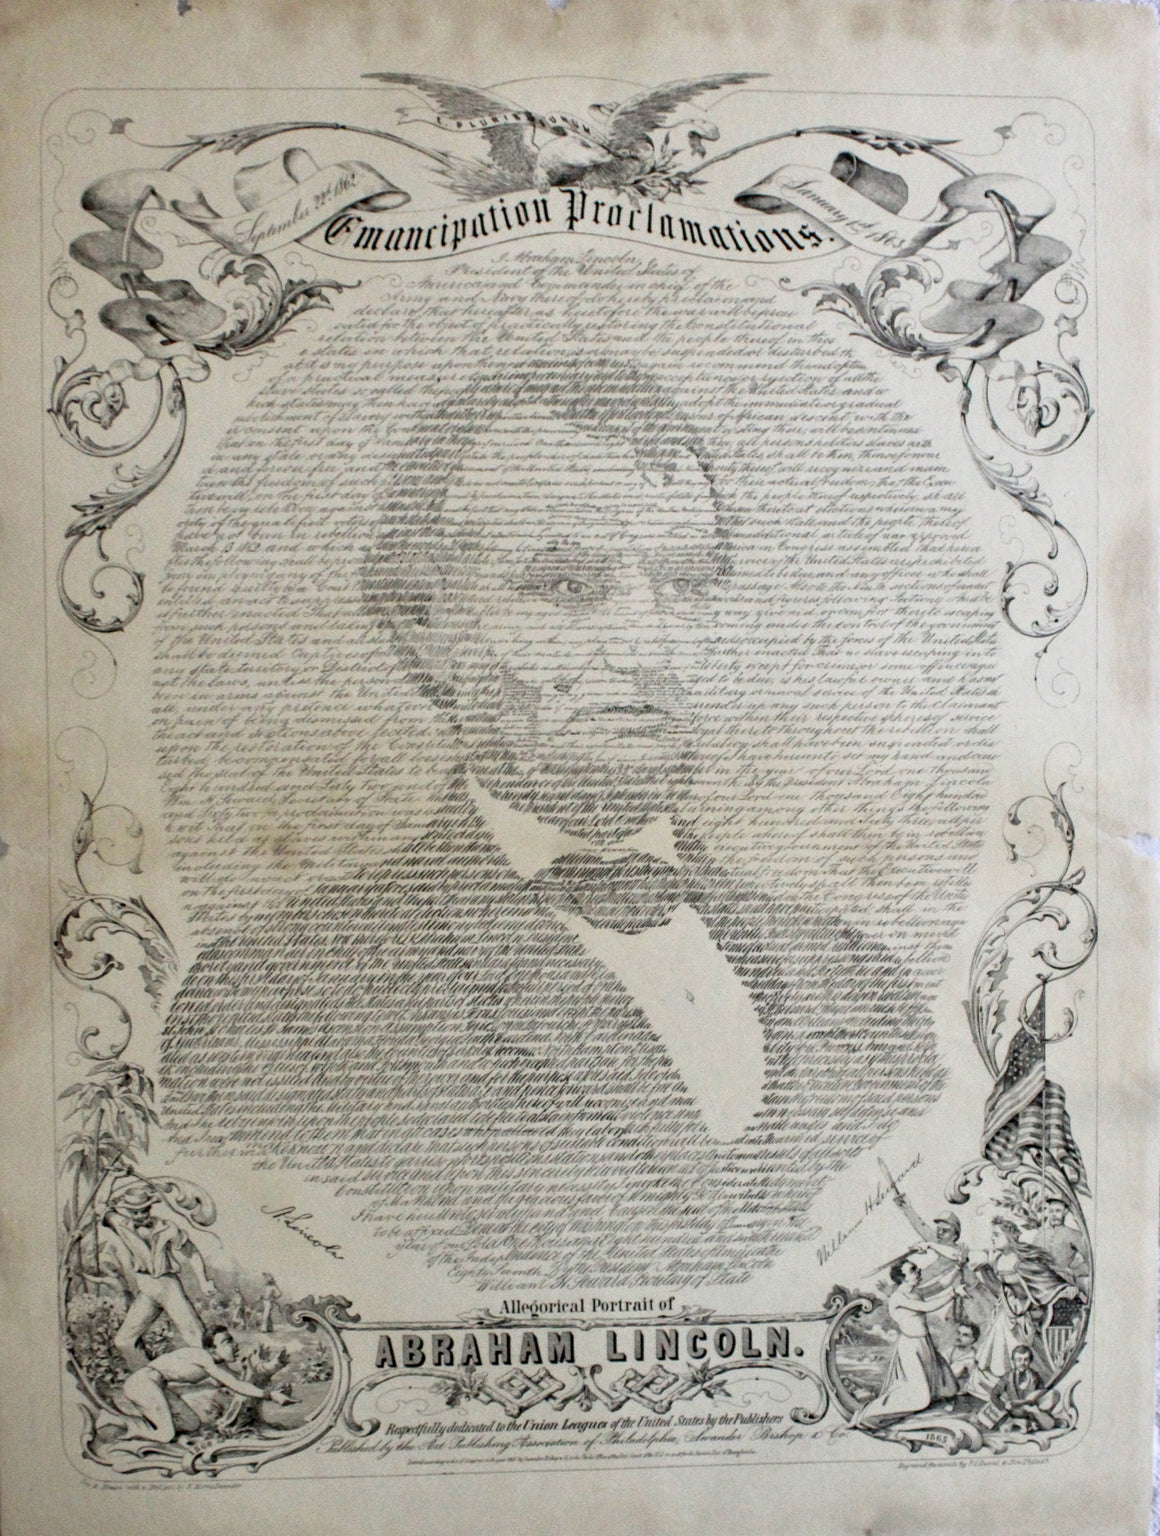 1865 "Emancipation Proclamations. Allegorical Portrait of Abraham Lincoln" Engraving by Swander, Bishop & Co.